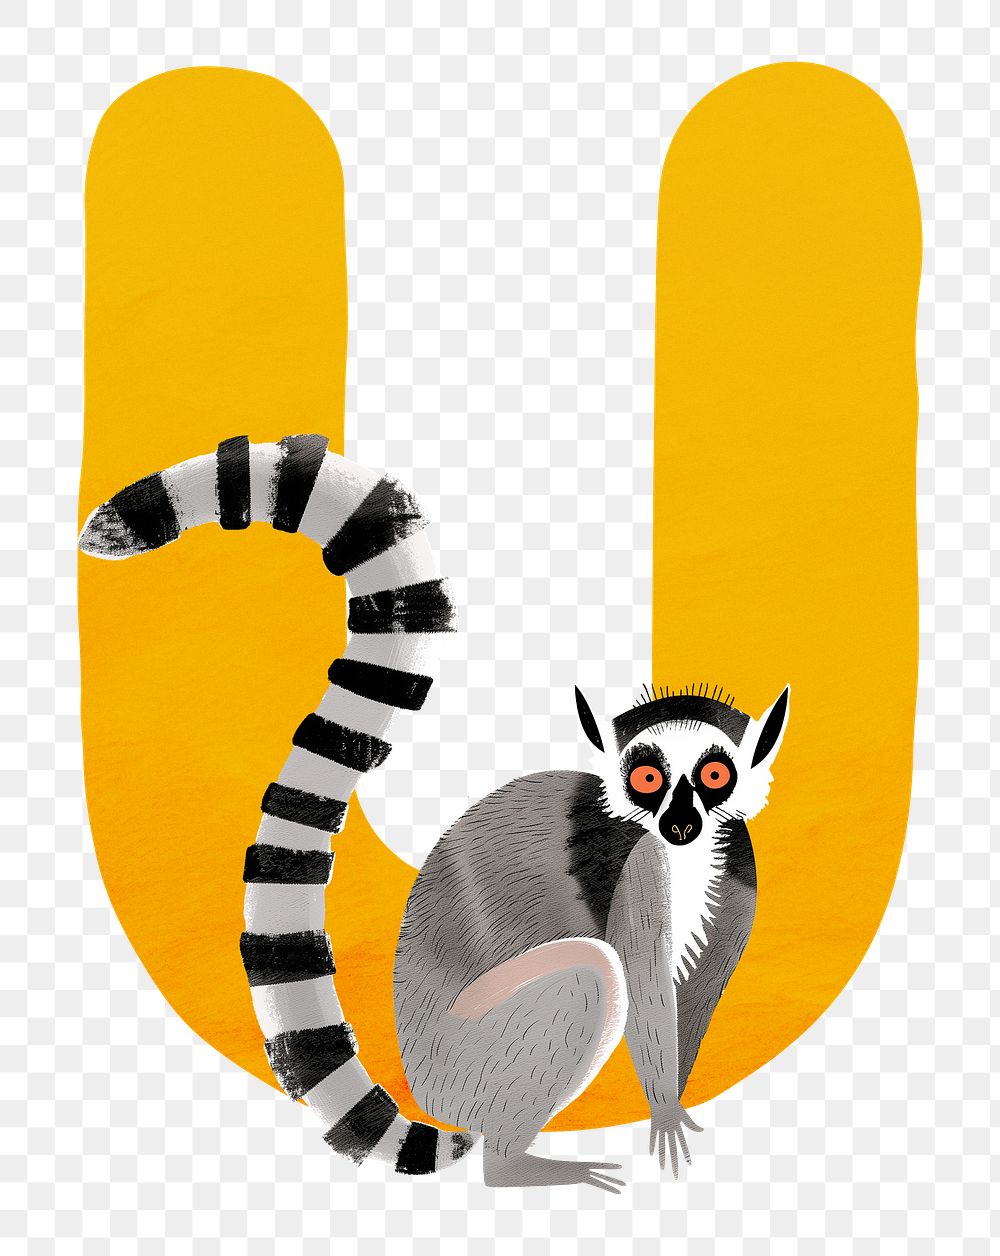 PNG yellow letter U with animal character, transparent background